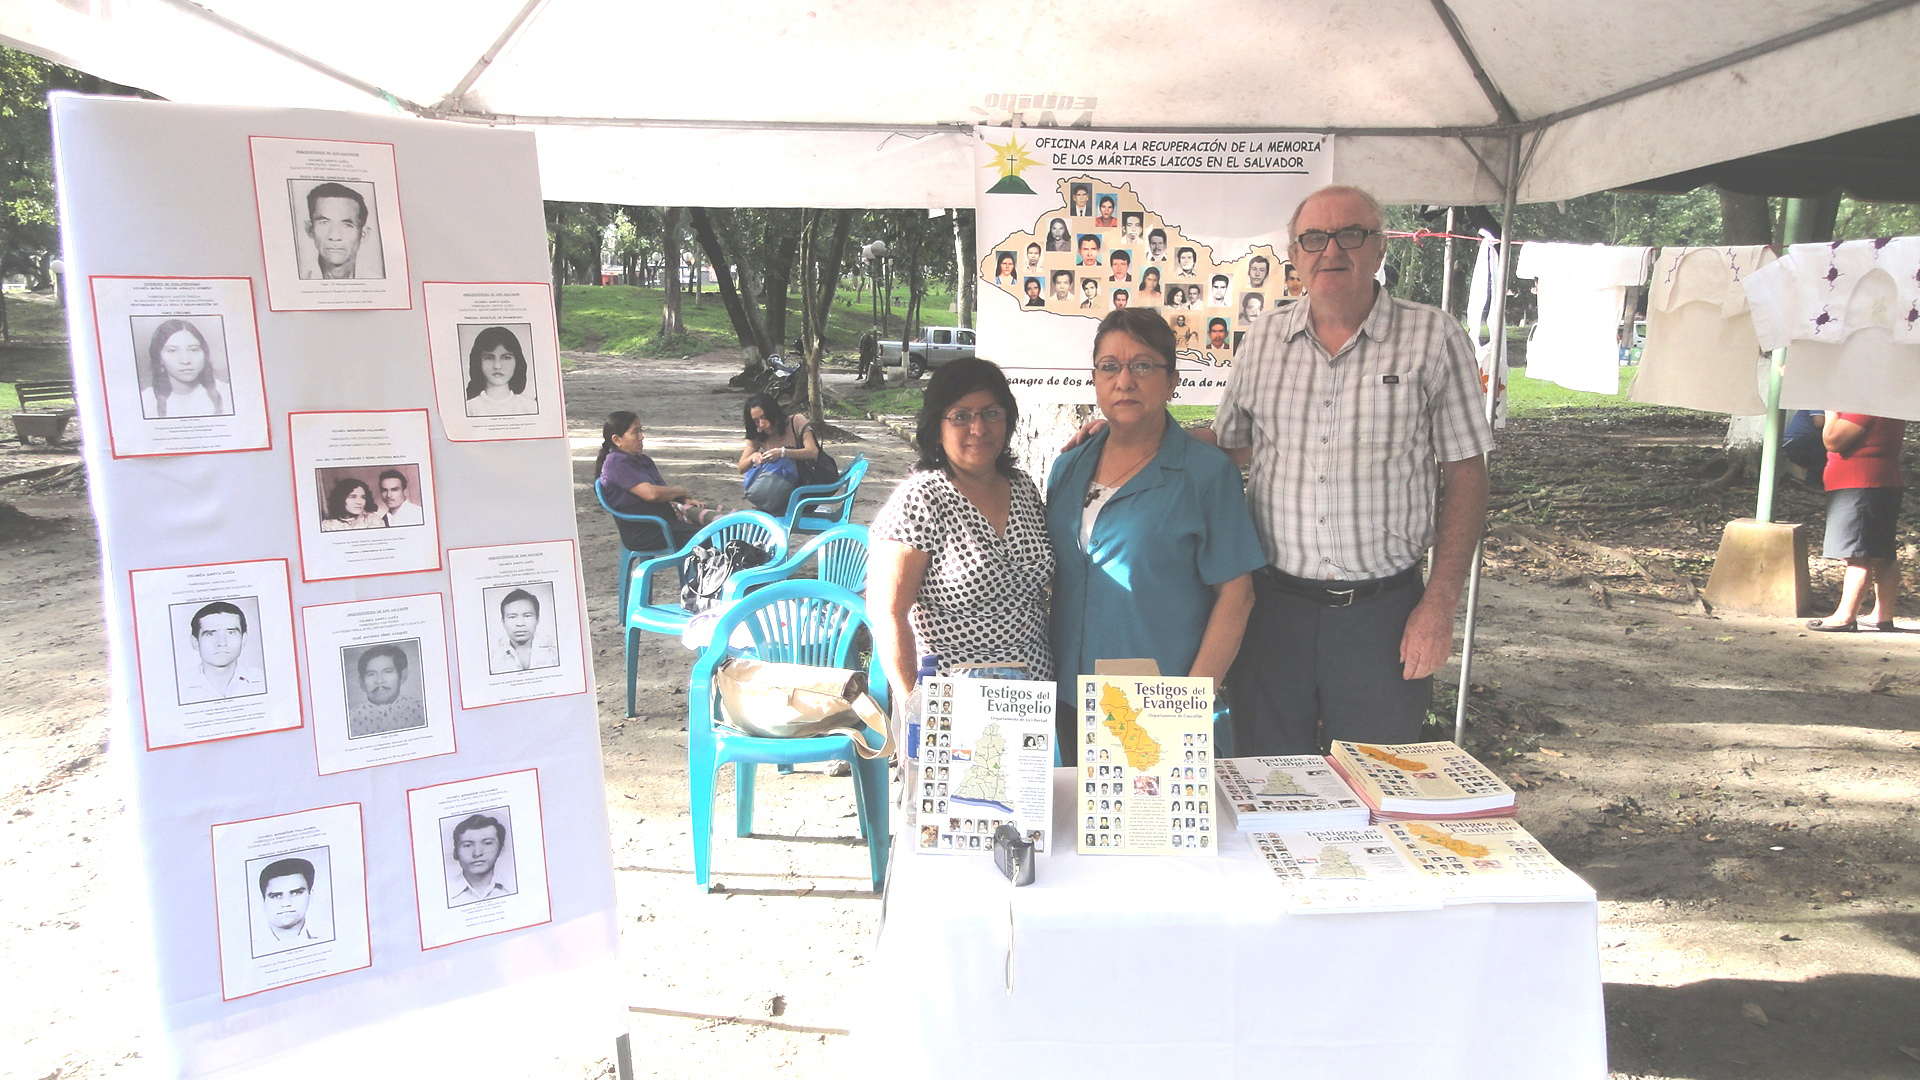 Ana Leticia Henriquez, researcher (left), Martha Figueroa, editor - both employees of the Office of Martyrs and Fr Tomás Ciaran Ó Nuanain